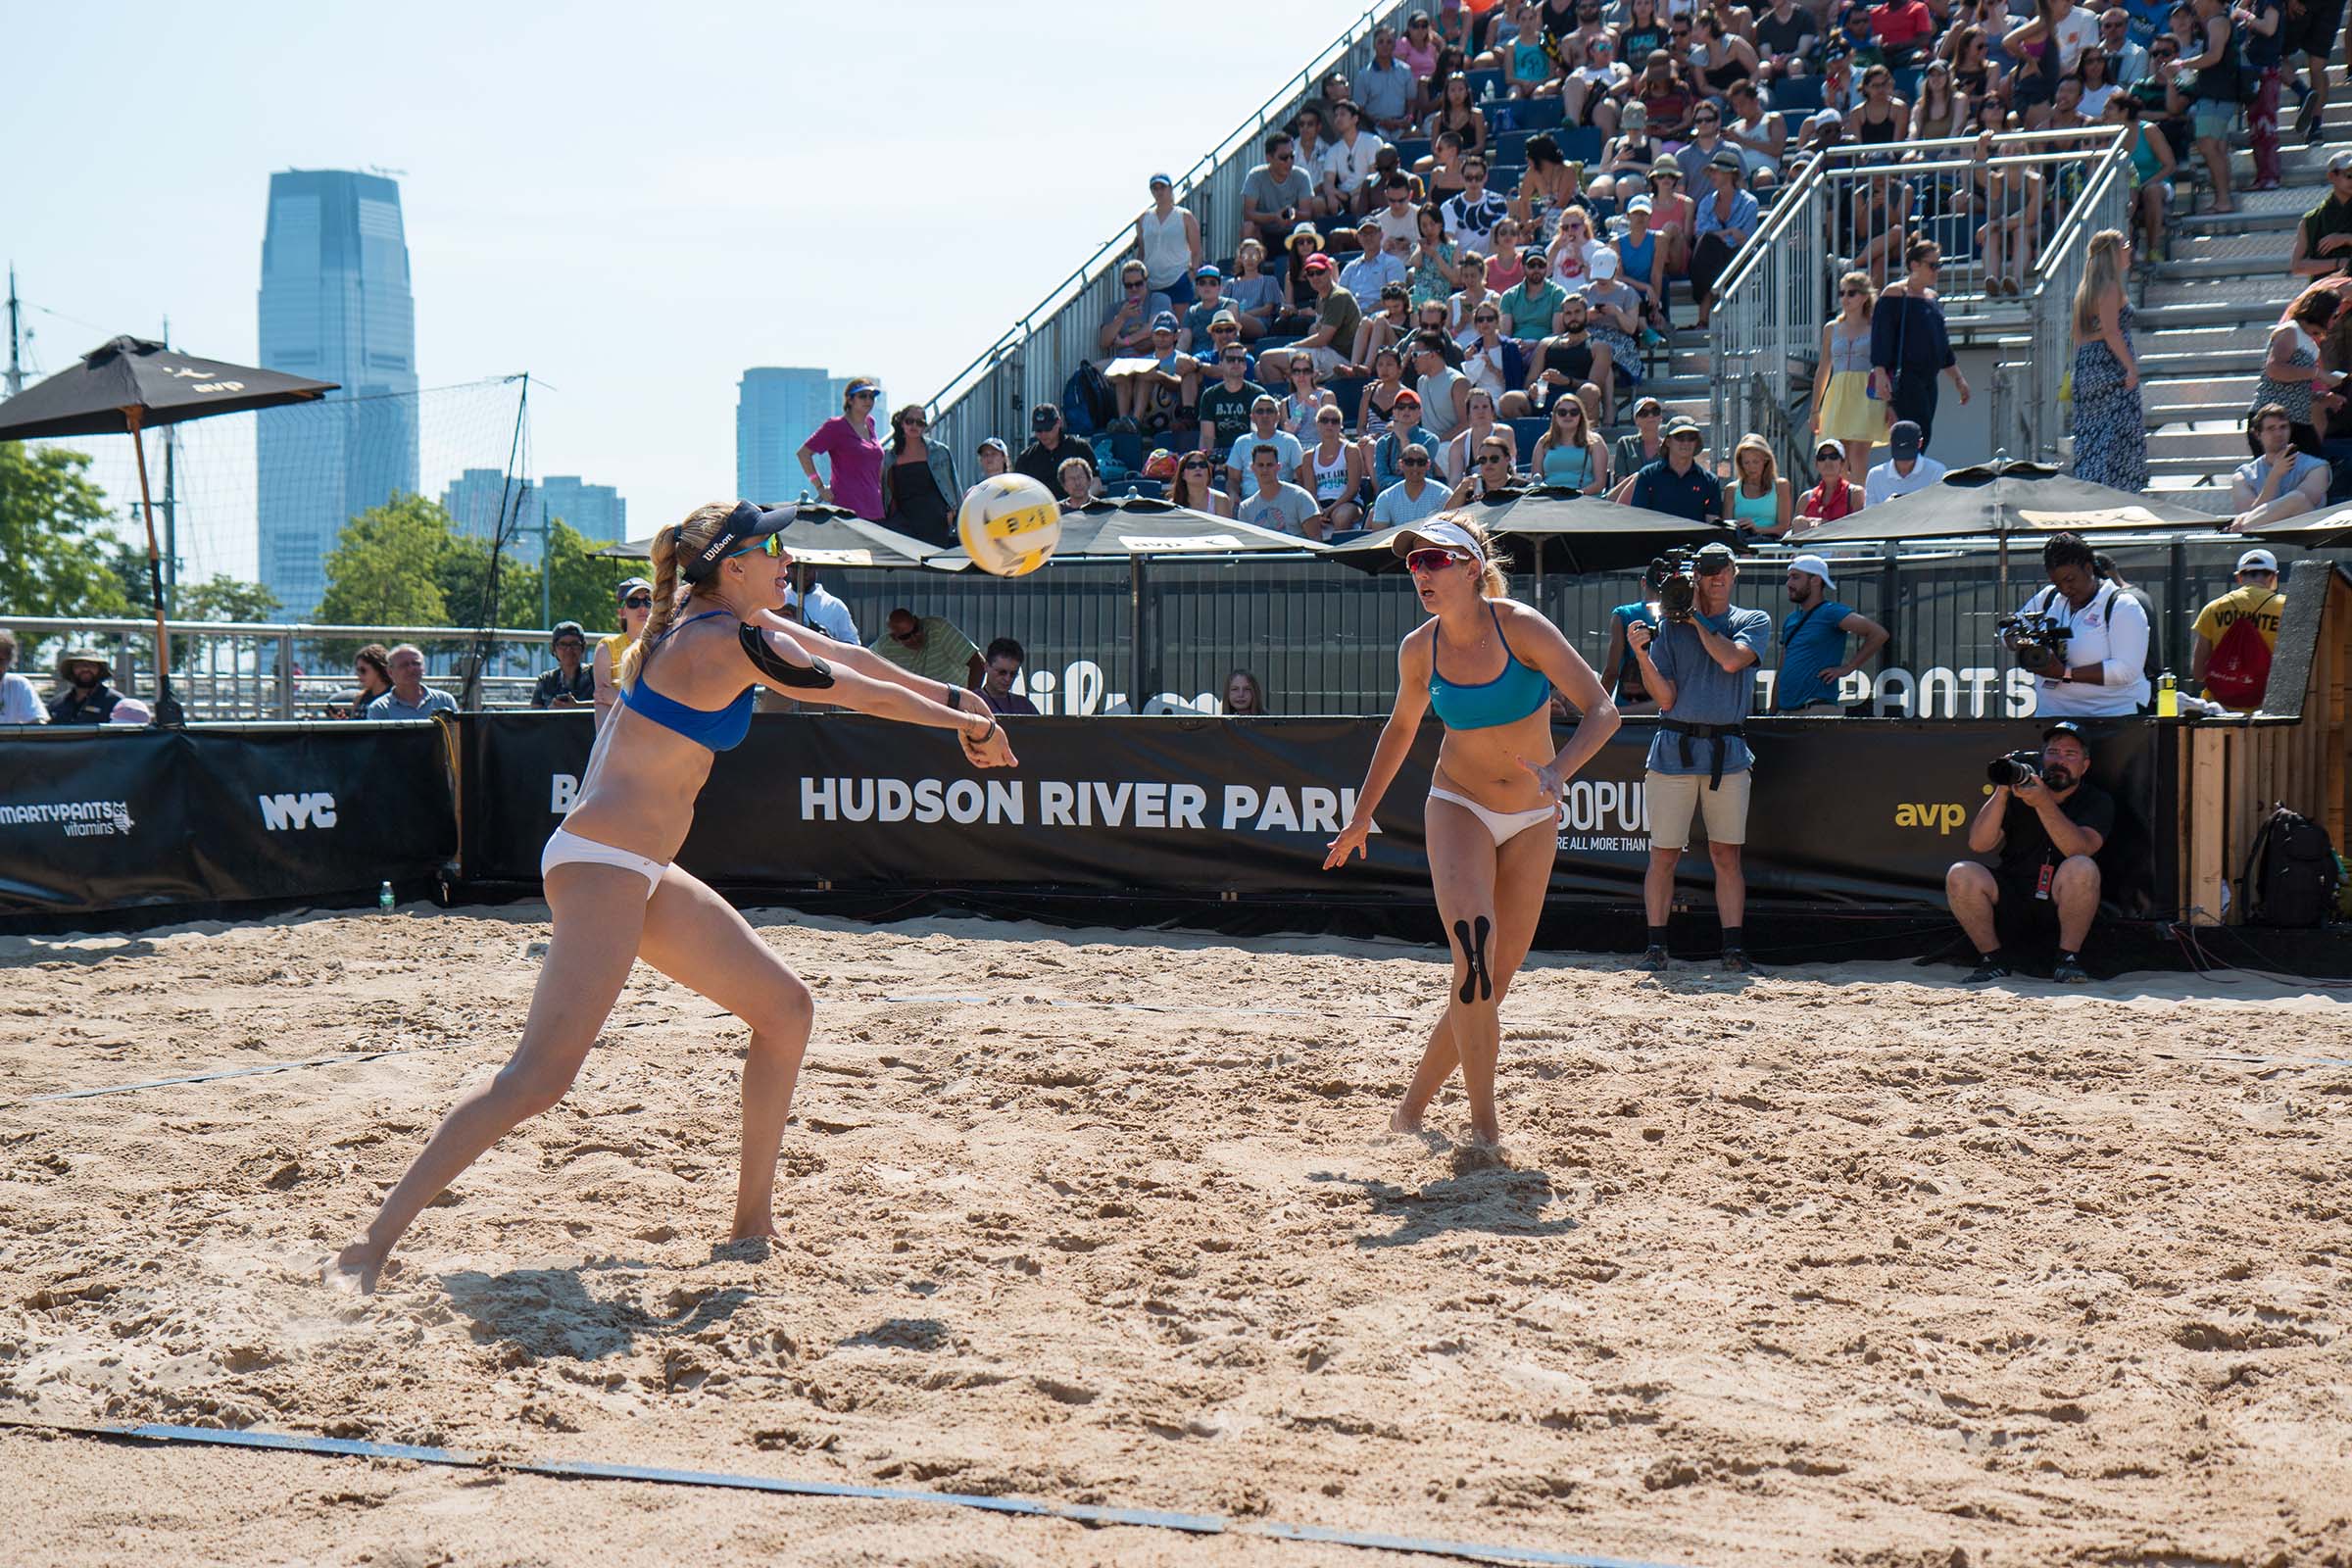 Two beach volleyball players playing in front of an audience in bleachers; one player is performing a dig while the other moves into position for a set.